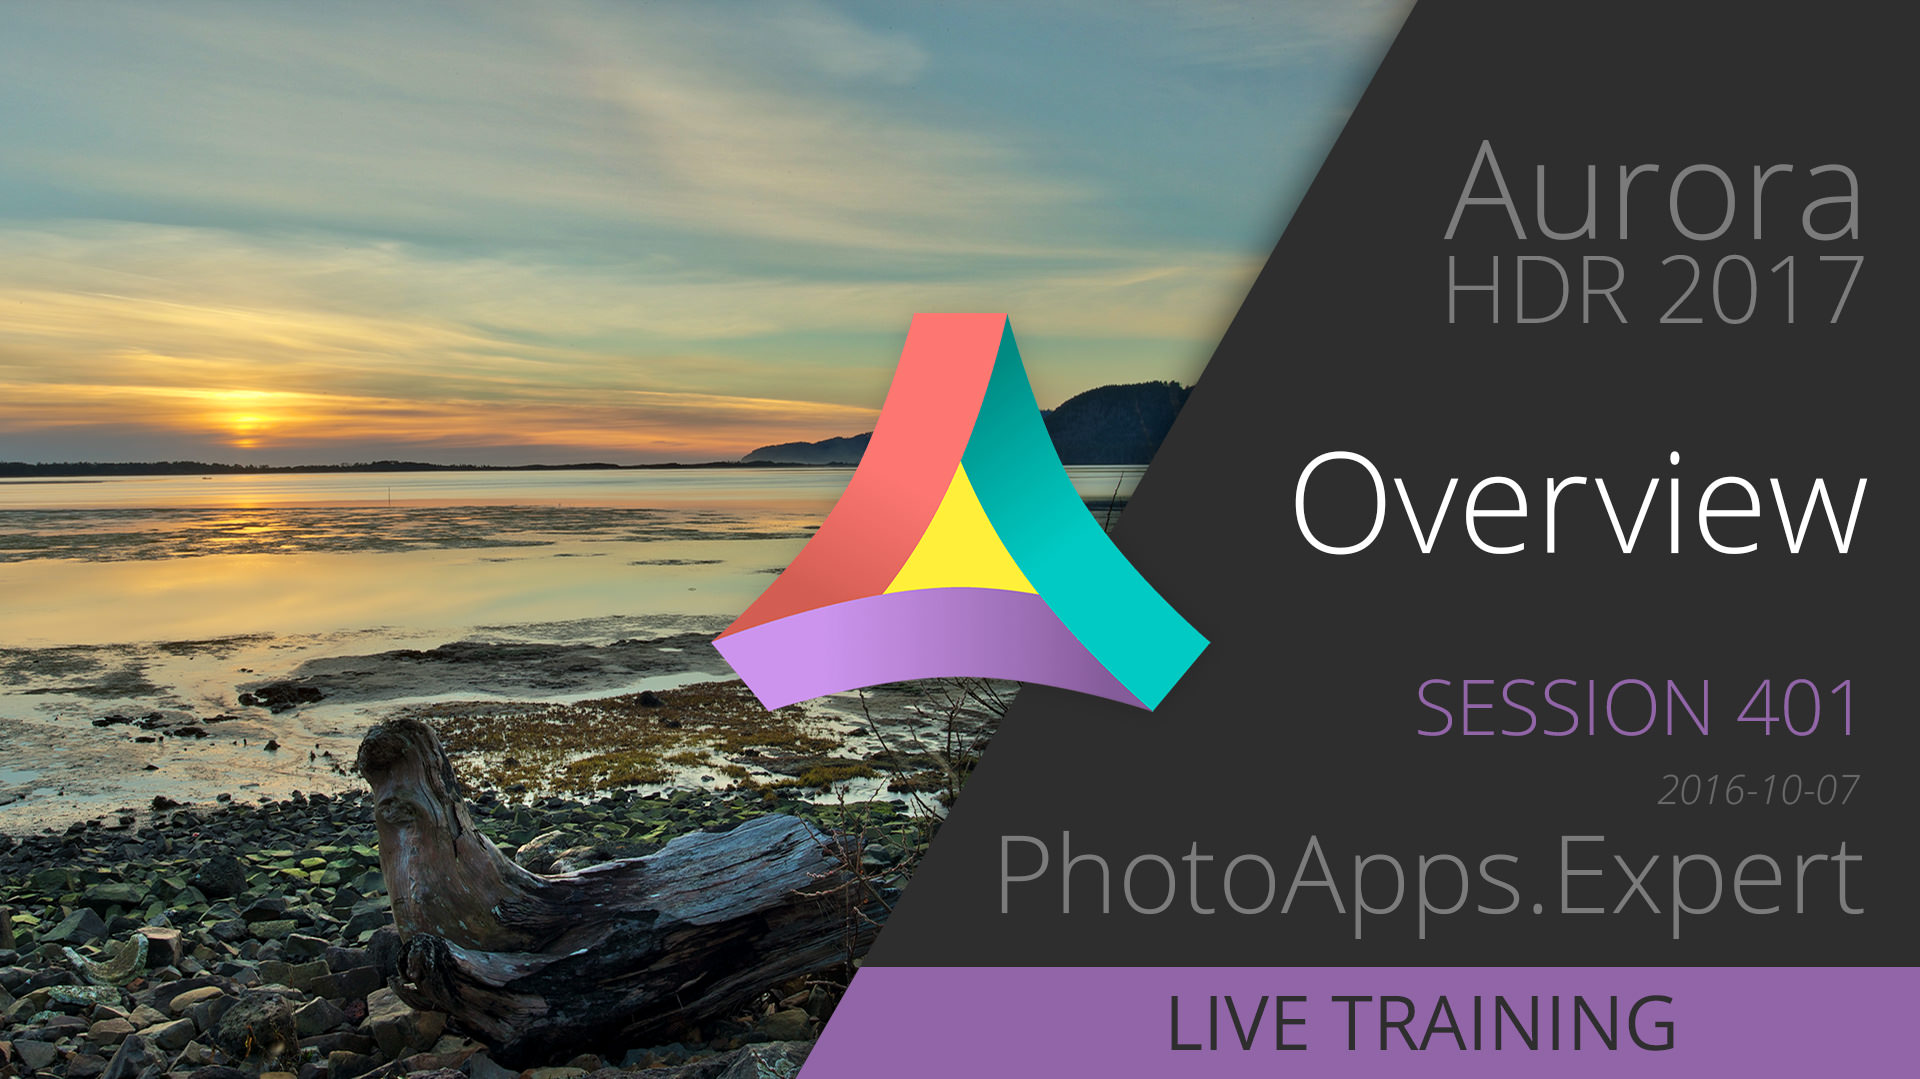 Aurora HDR 2017 Live Training session 401 OVERVIEW